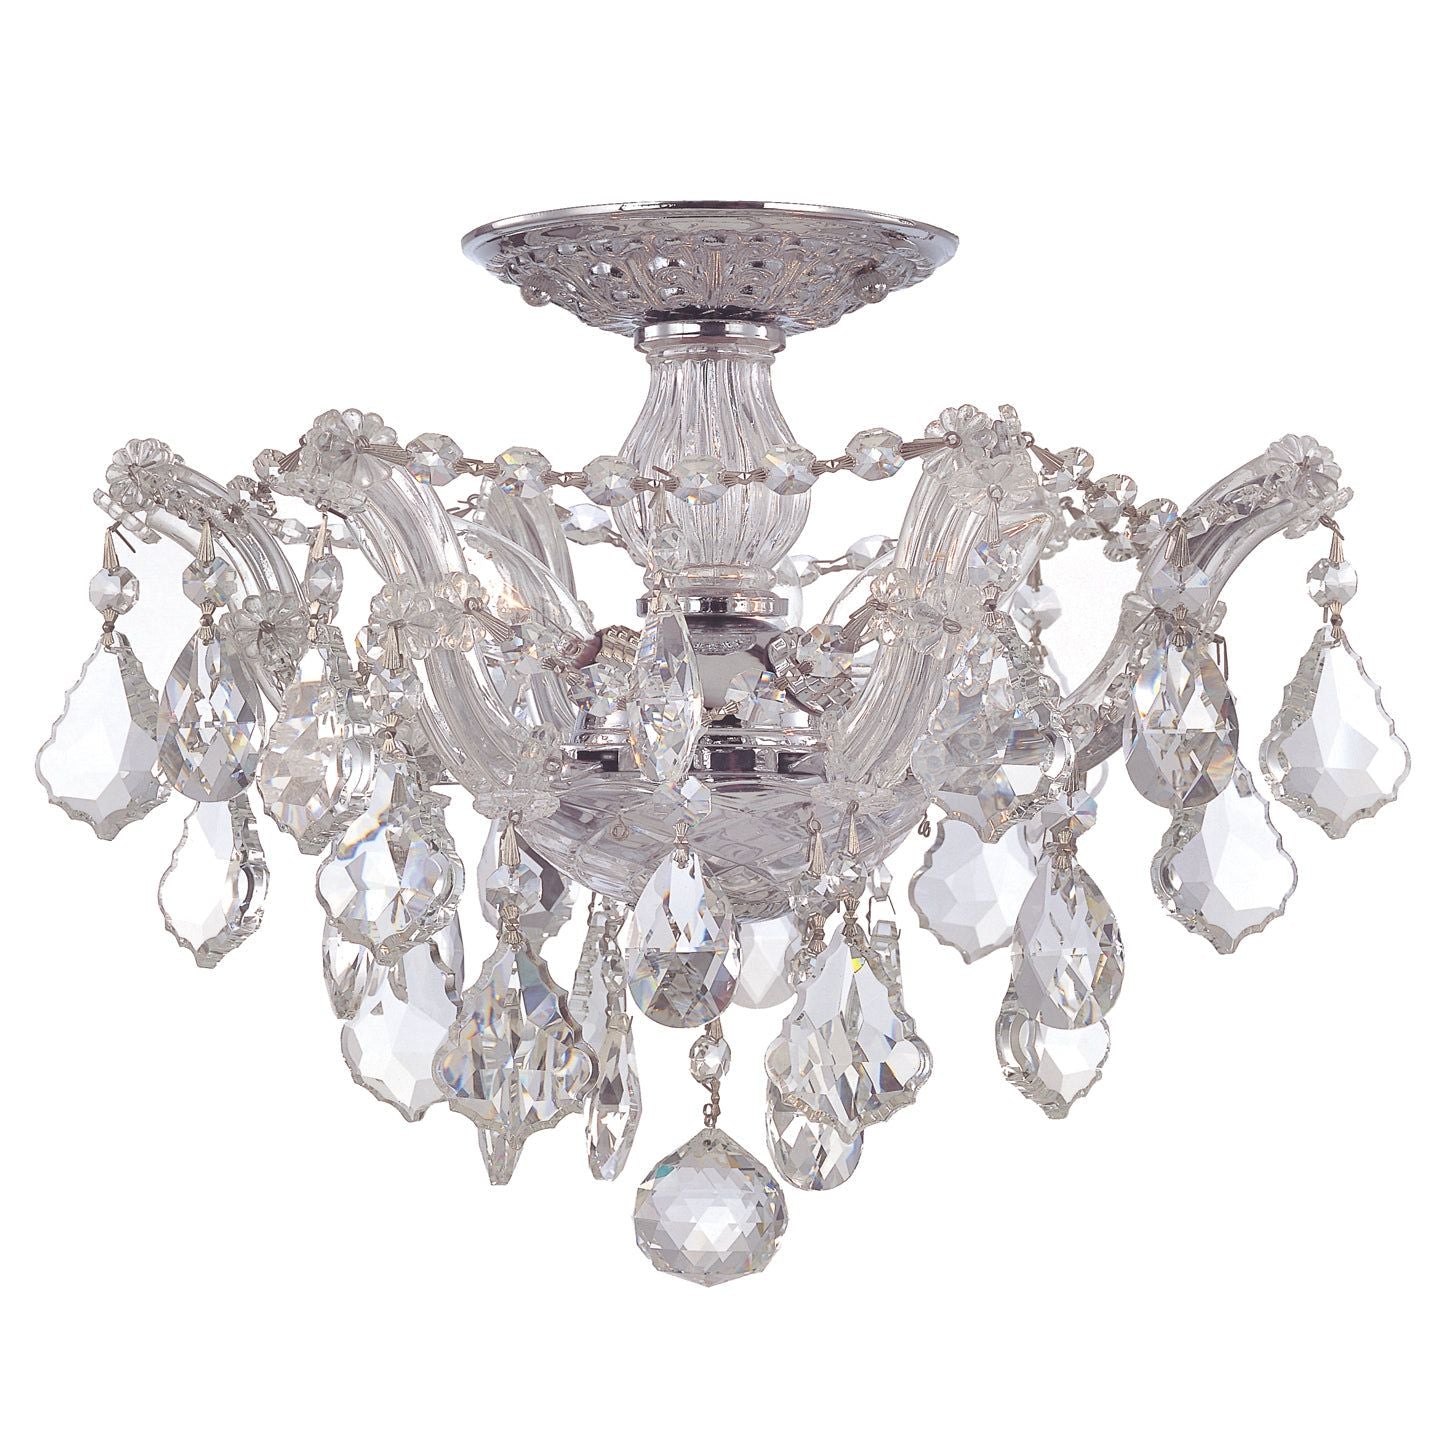 Crystorama - 4430-CH-CL-S - Three Light Ceiling Mount - Maria Theresa - Polished Chrome